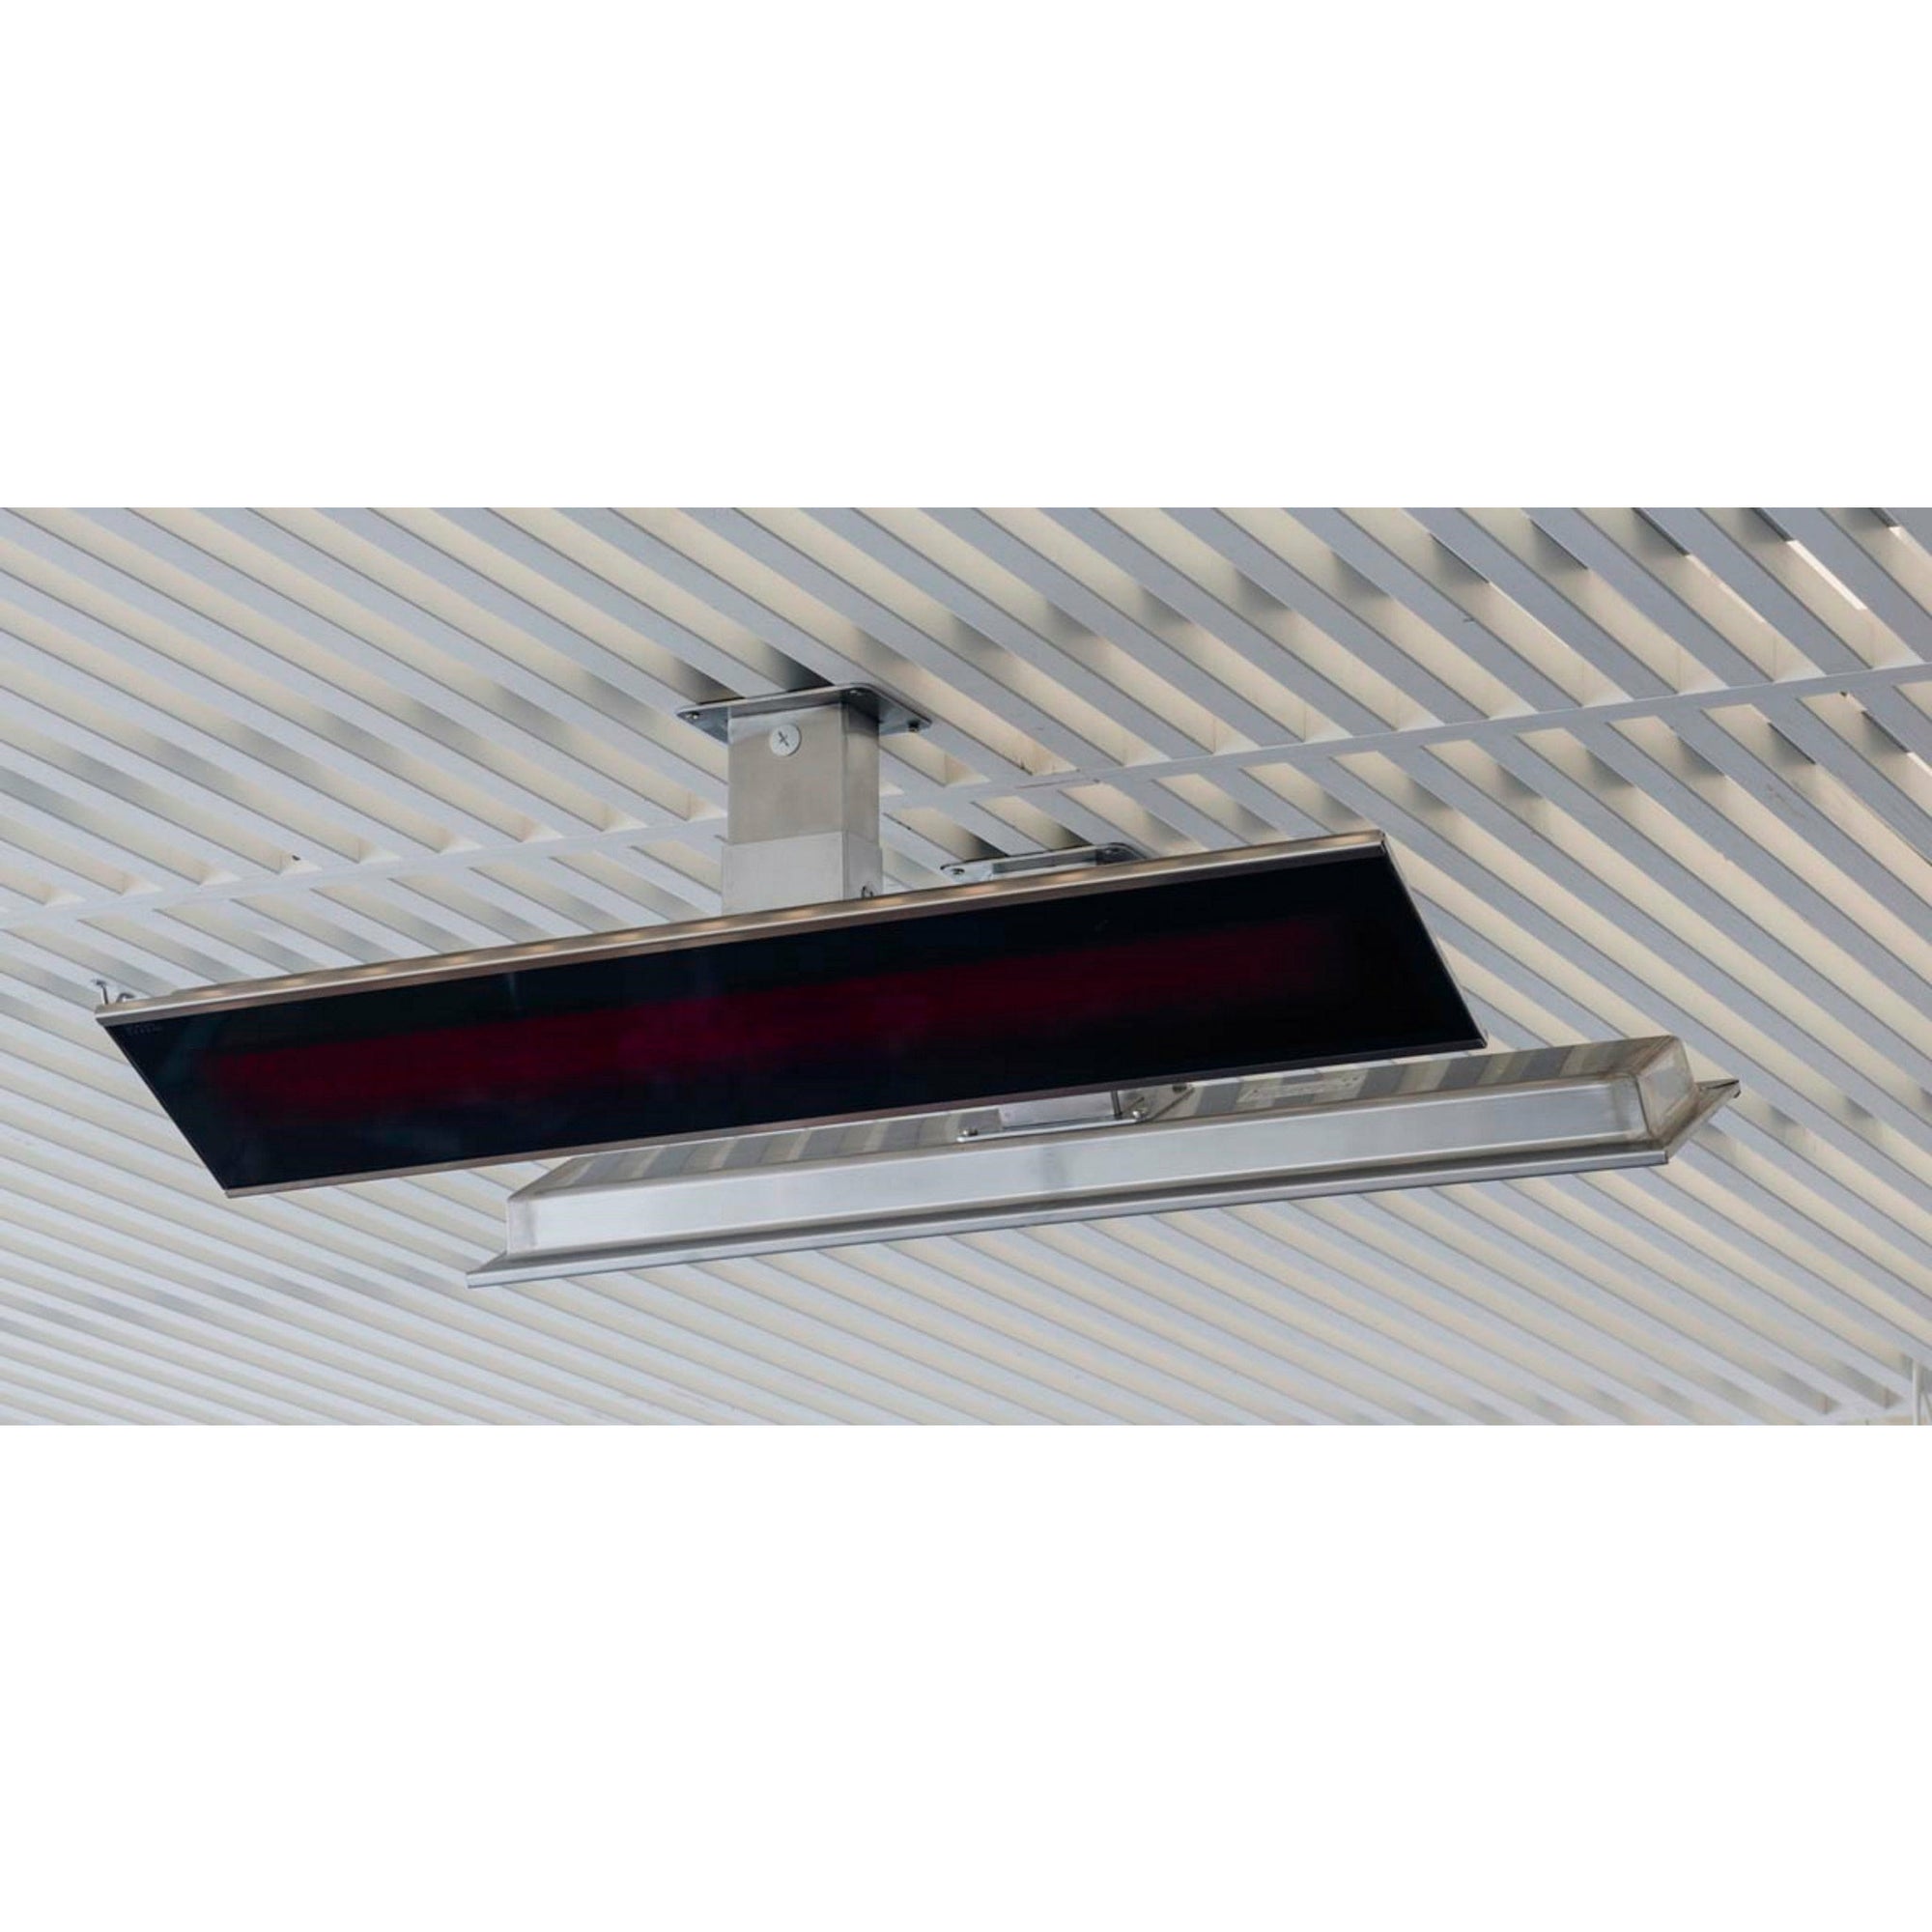 3400W Platinum Smart-Heat Electric Heater in Black Stainless Steel Tinted Glass-Ceramic Screen Slim-line Design in a white background